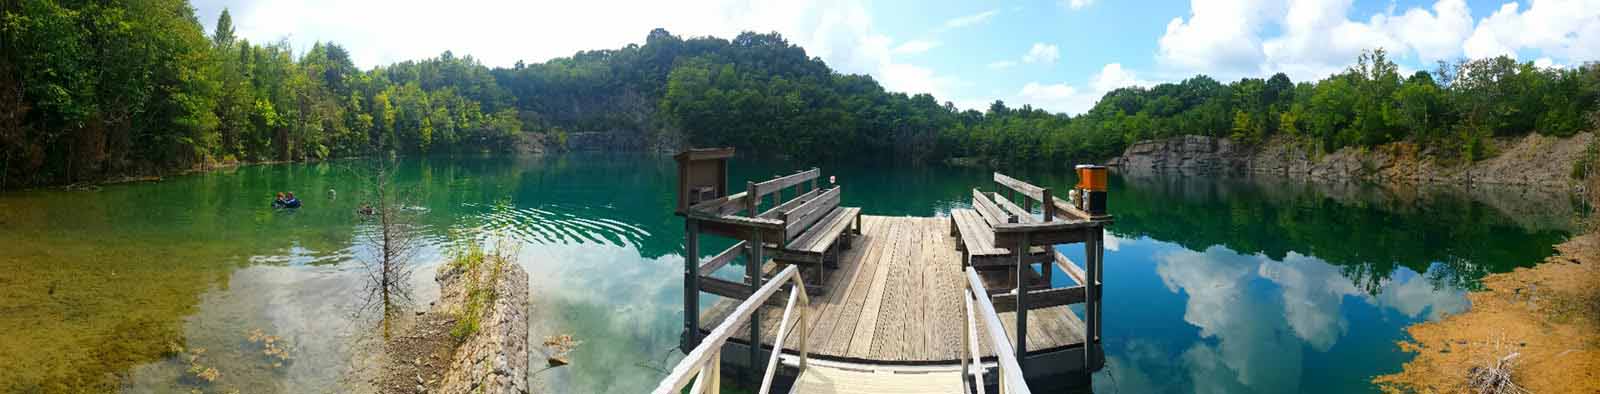 We are a scuba diving resort in Athens, TN that is based around a crystal clear, ten acre quarry lake.